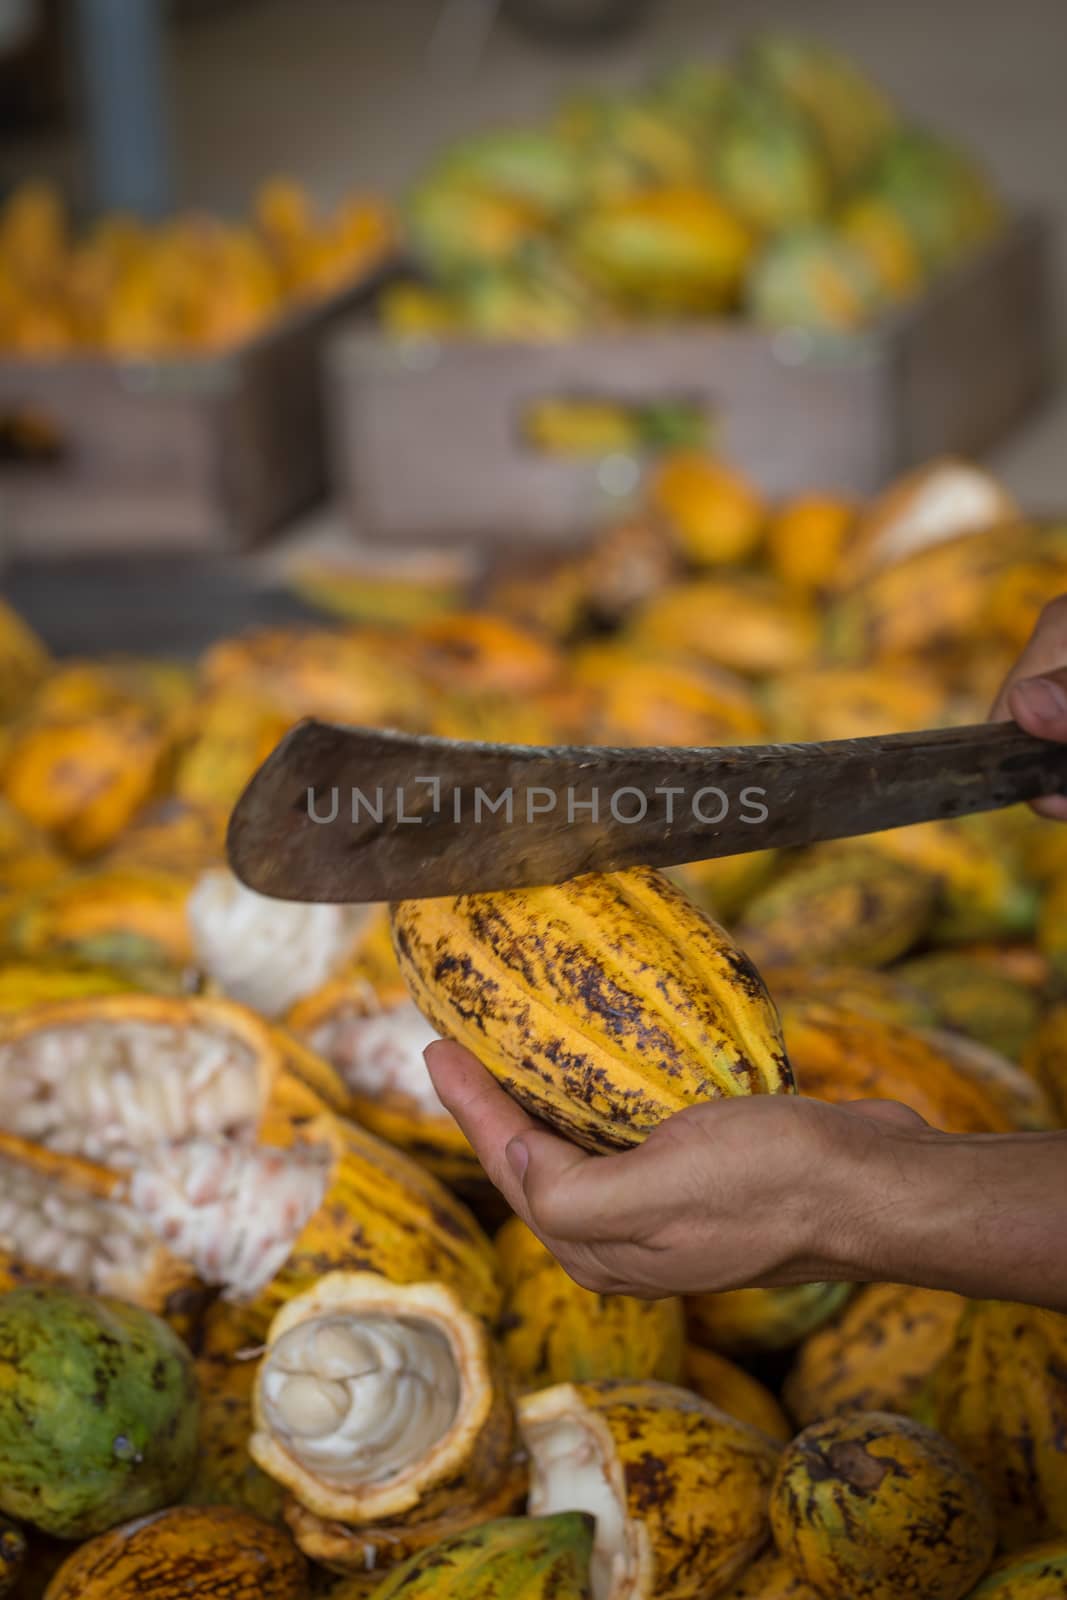 Cacao pod cut open to show cacao beans inside in Thailand.